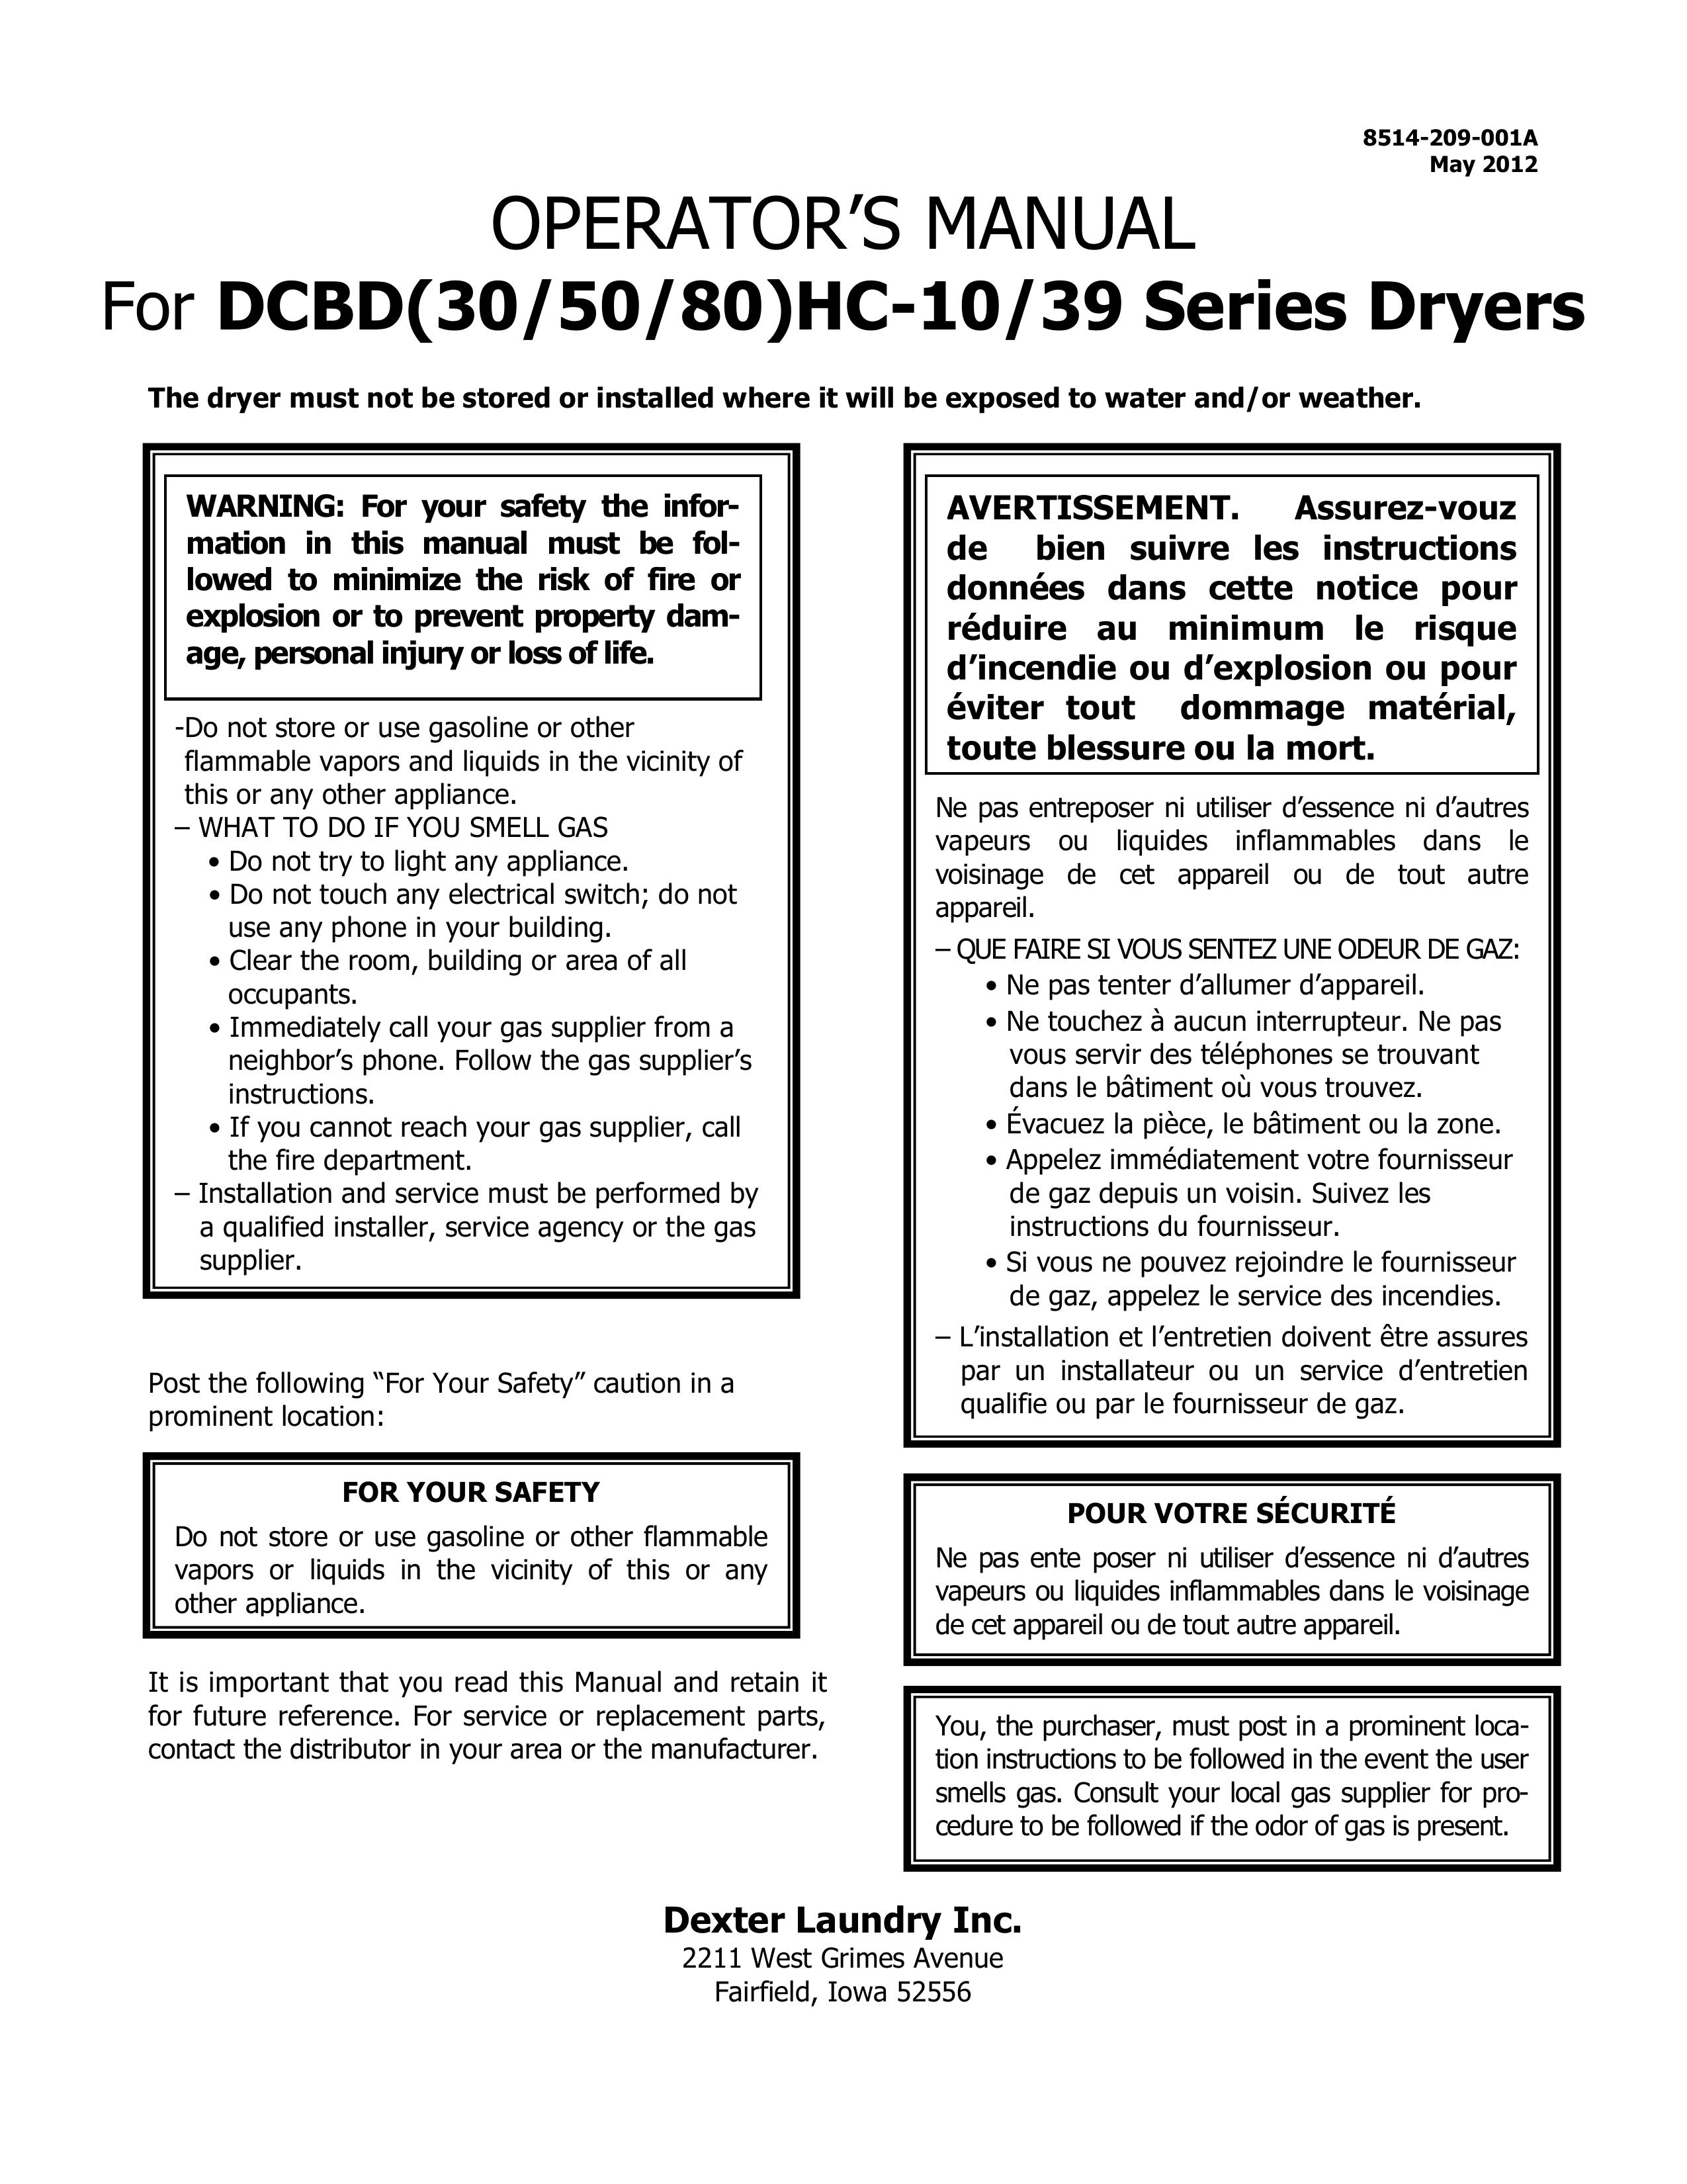 CH Products DCBD80 Clothes Dryer User Manual